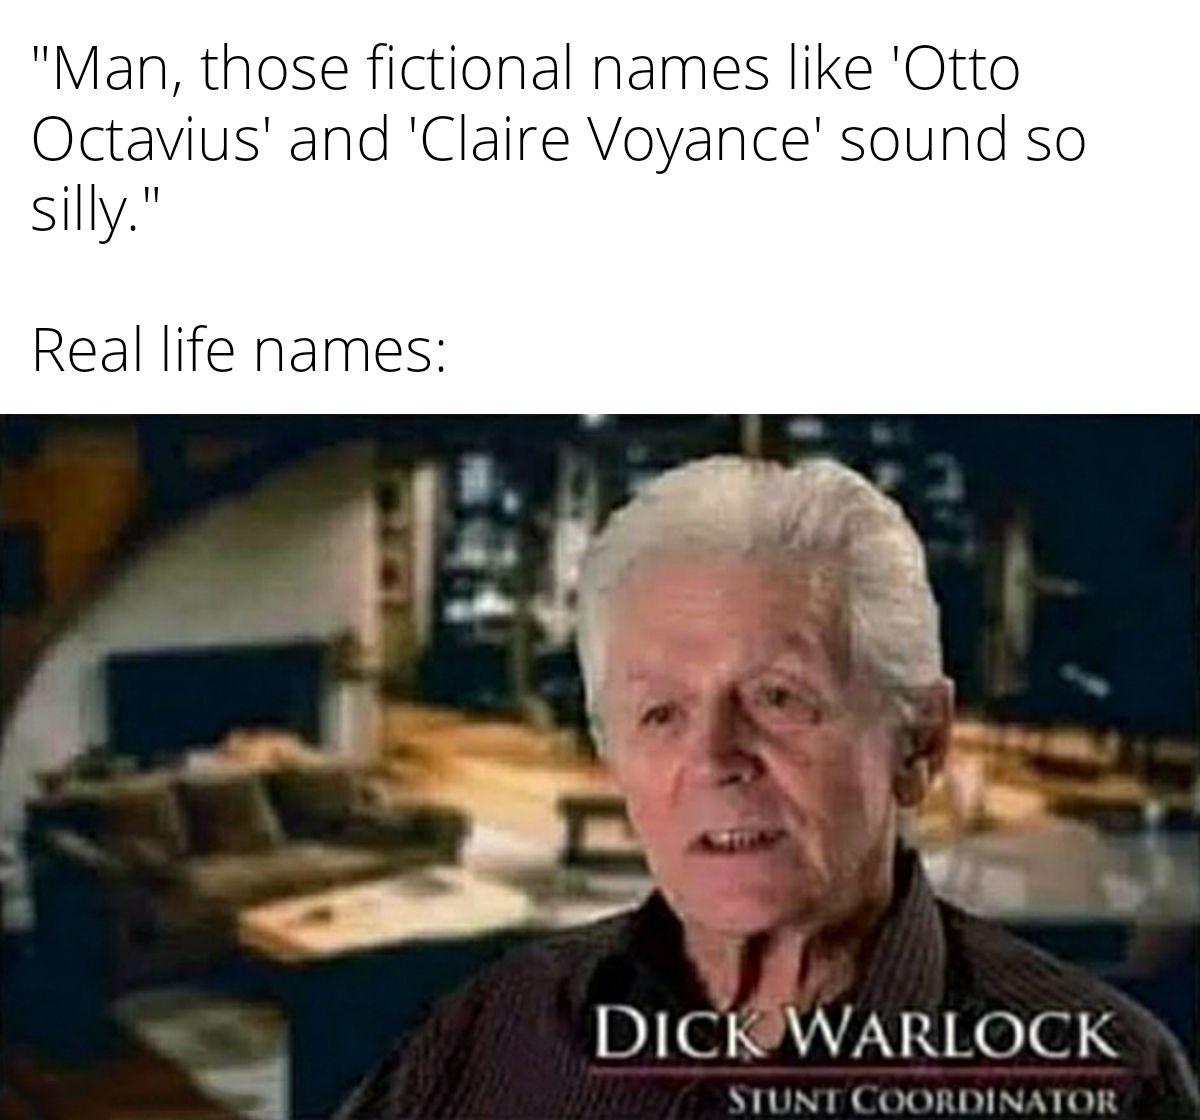 dank memes - dick warlock - "Man, those fictional names 'Otto Octavius' and 'Claire Voyance' sound so silly." Real life names Dick Warlock Stunt Coordinator